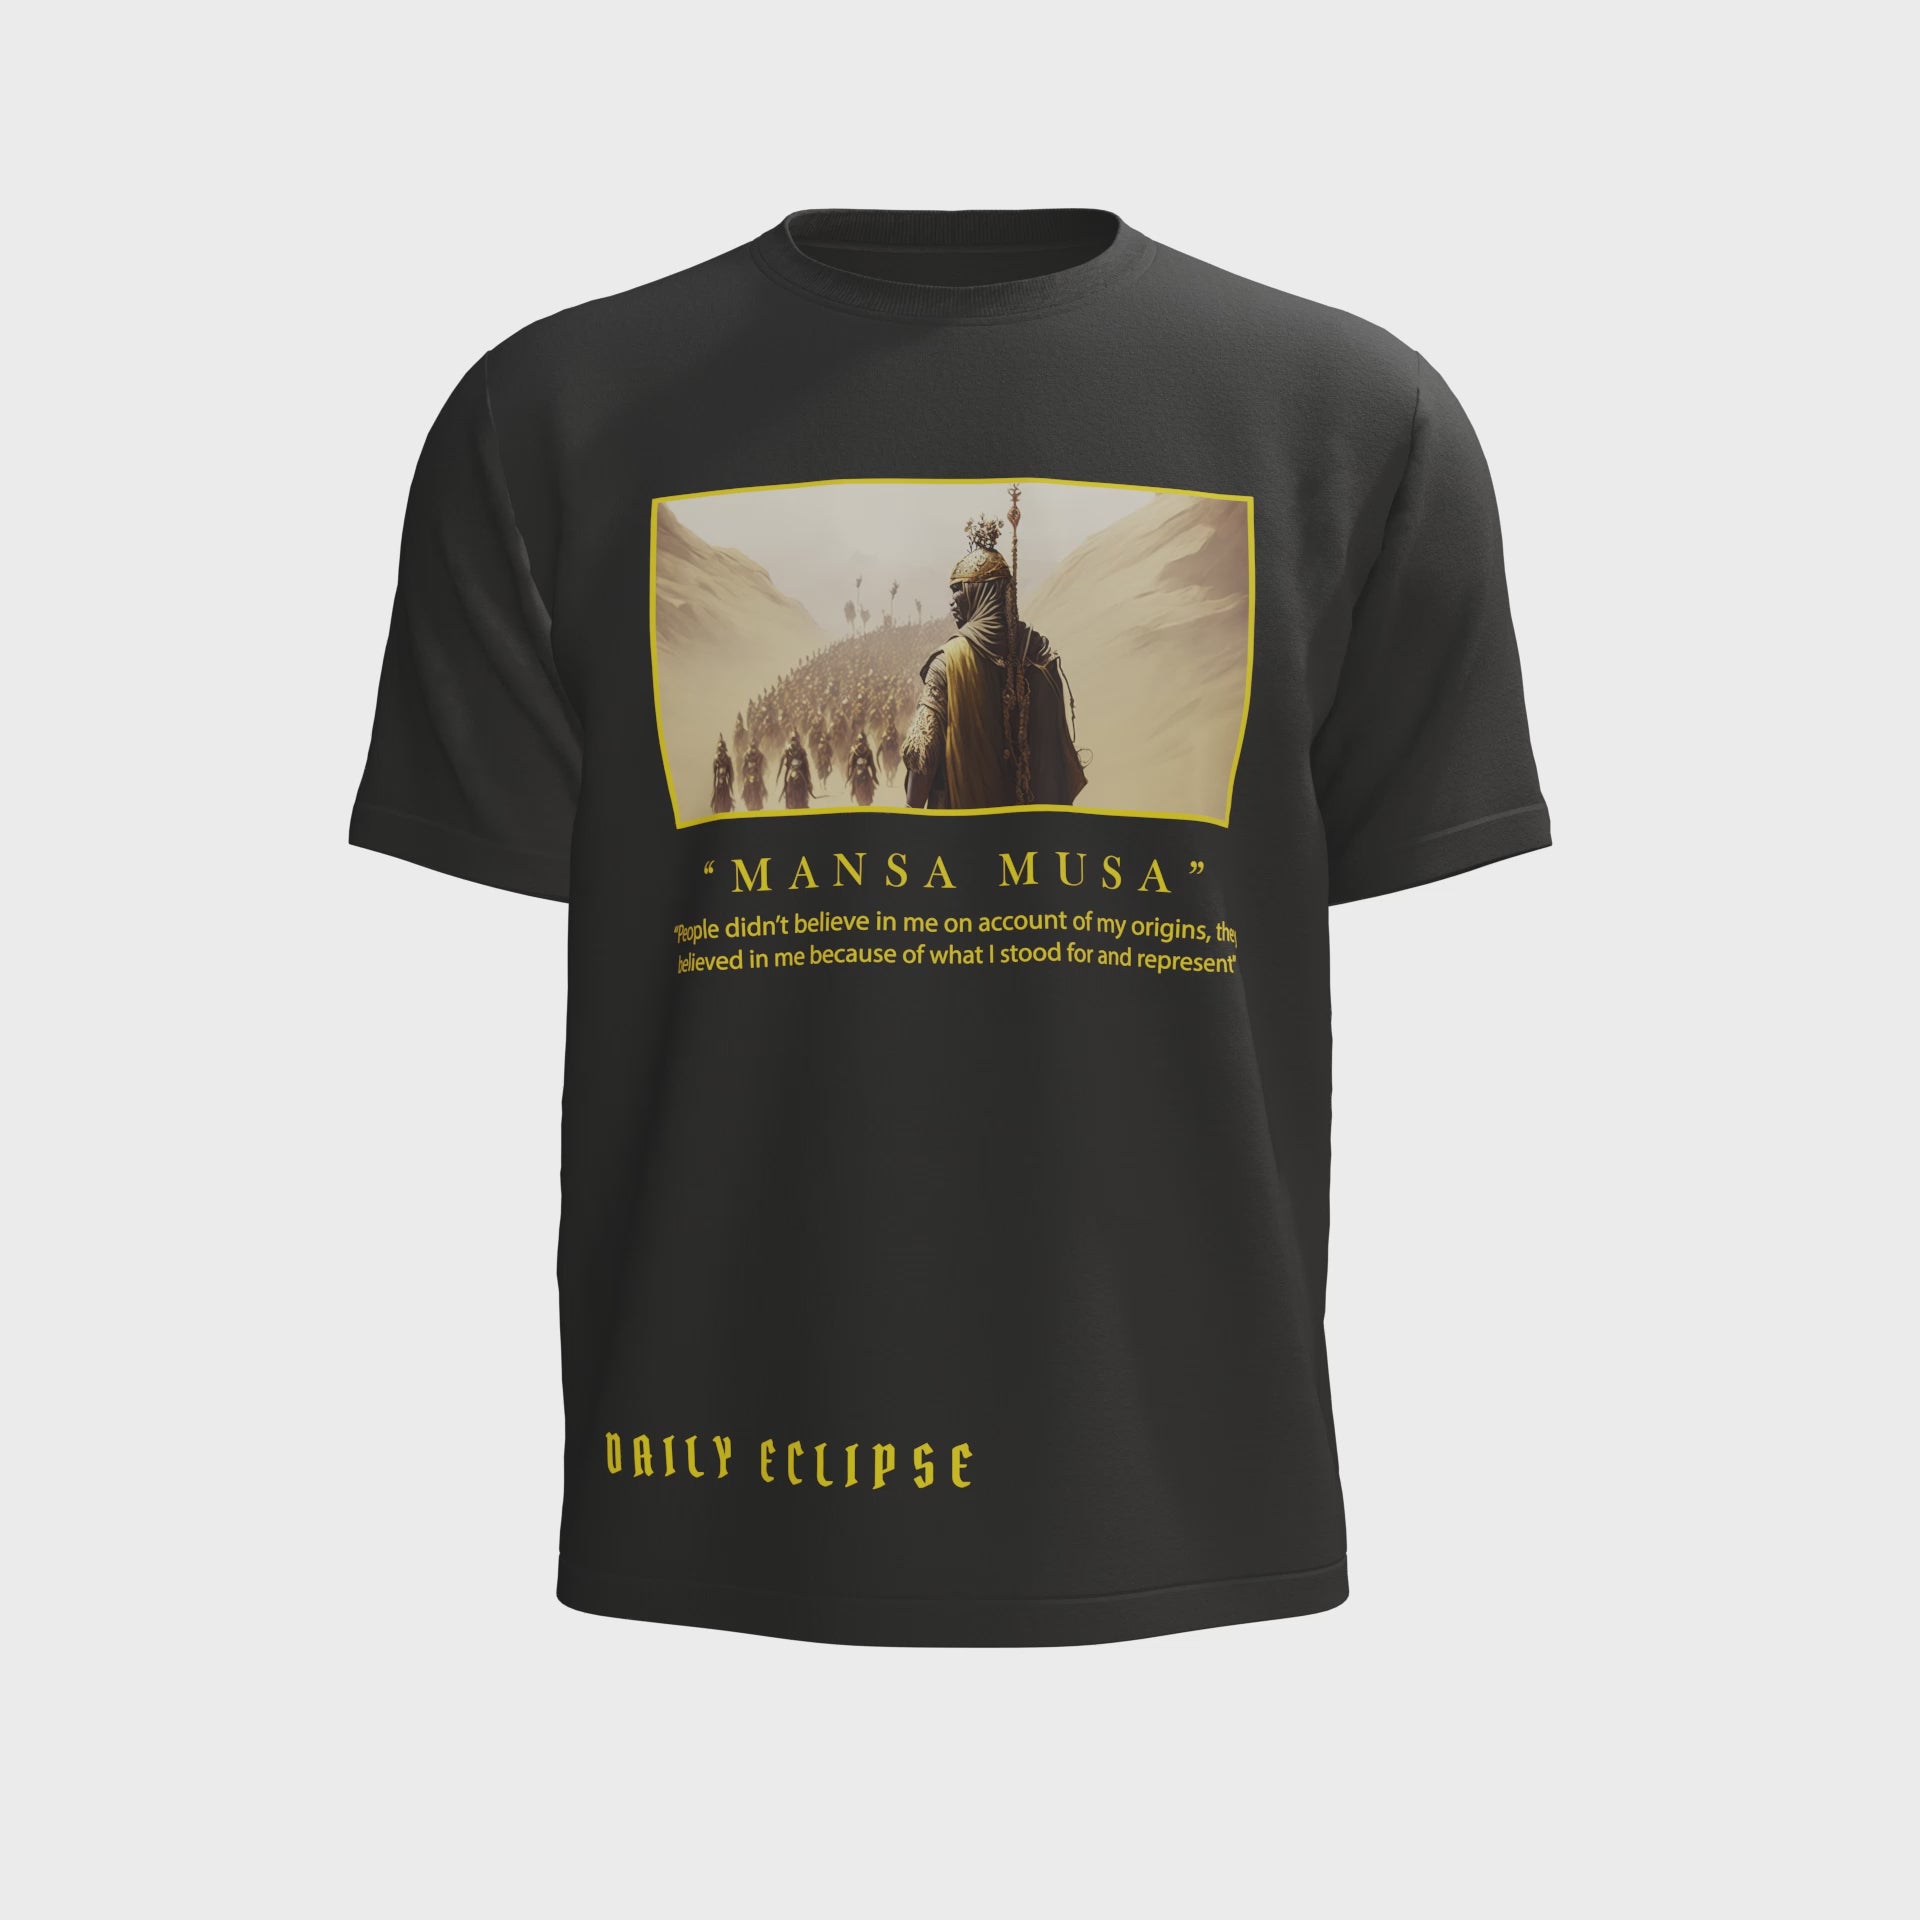 Mansa Musa tshirt, Crafted from 100% cotton with a 220gsm weight